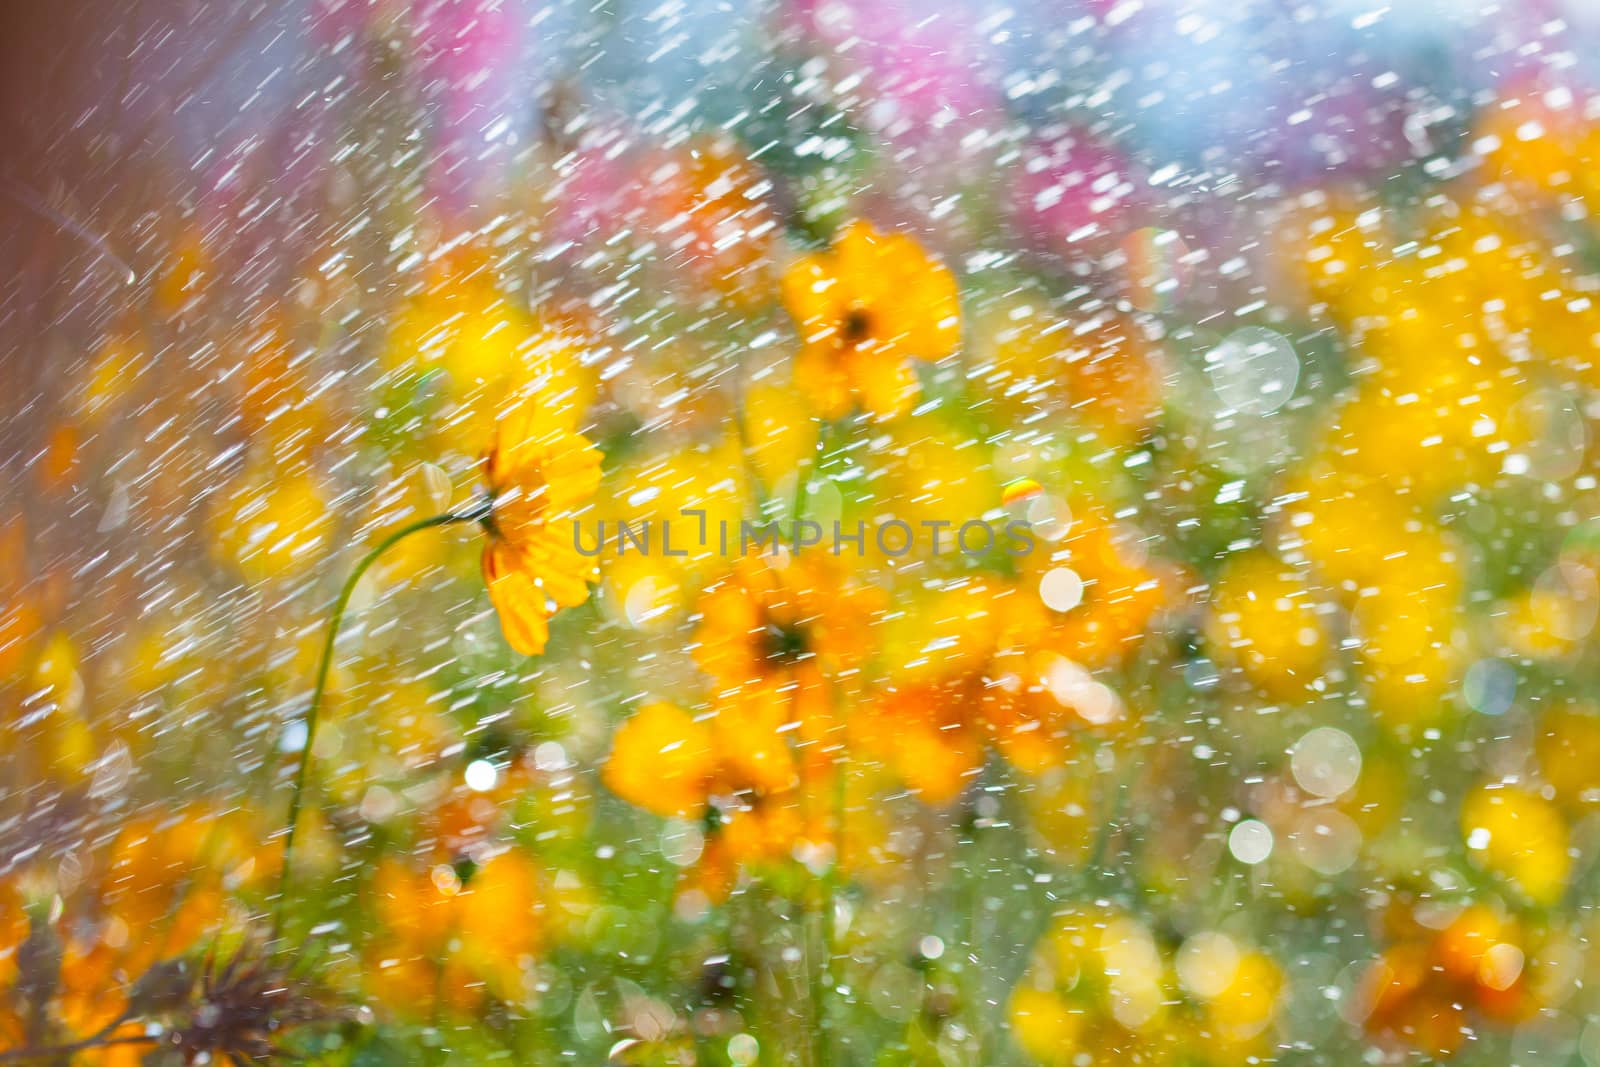 Flowers blooming in the rain the sun shines.